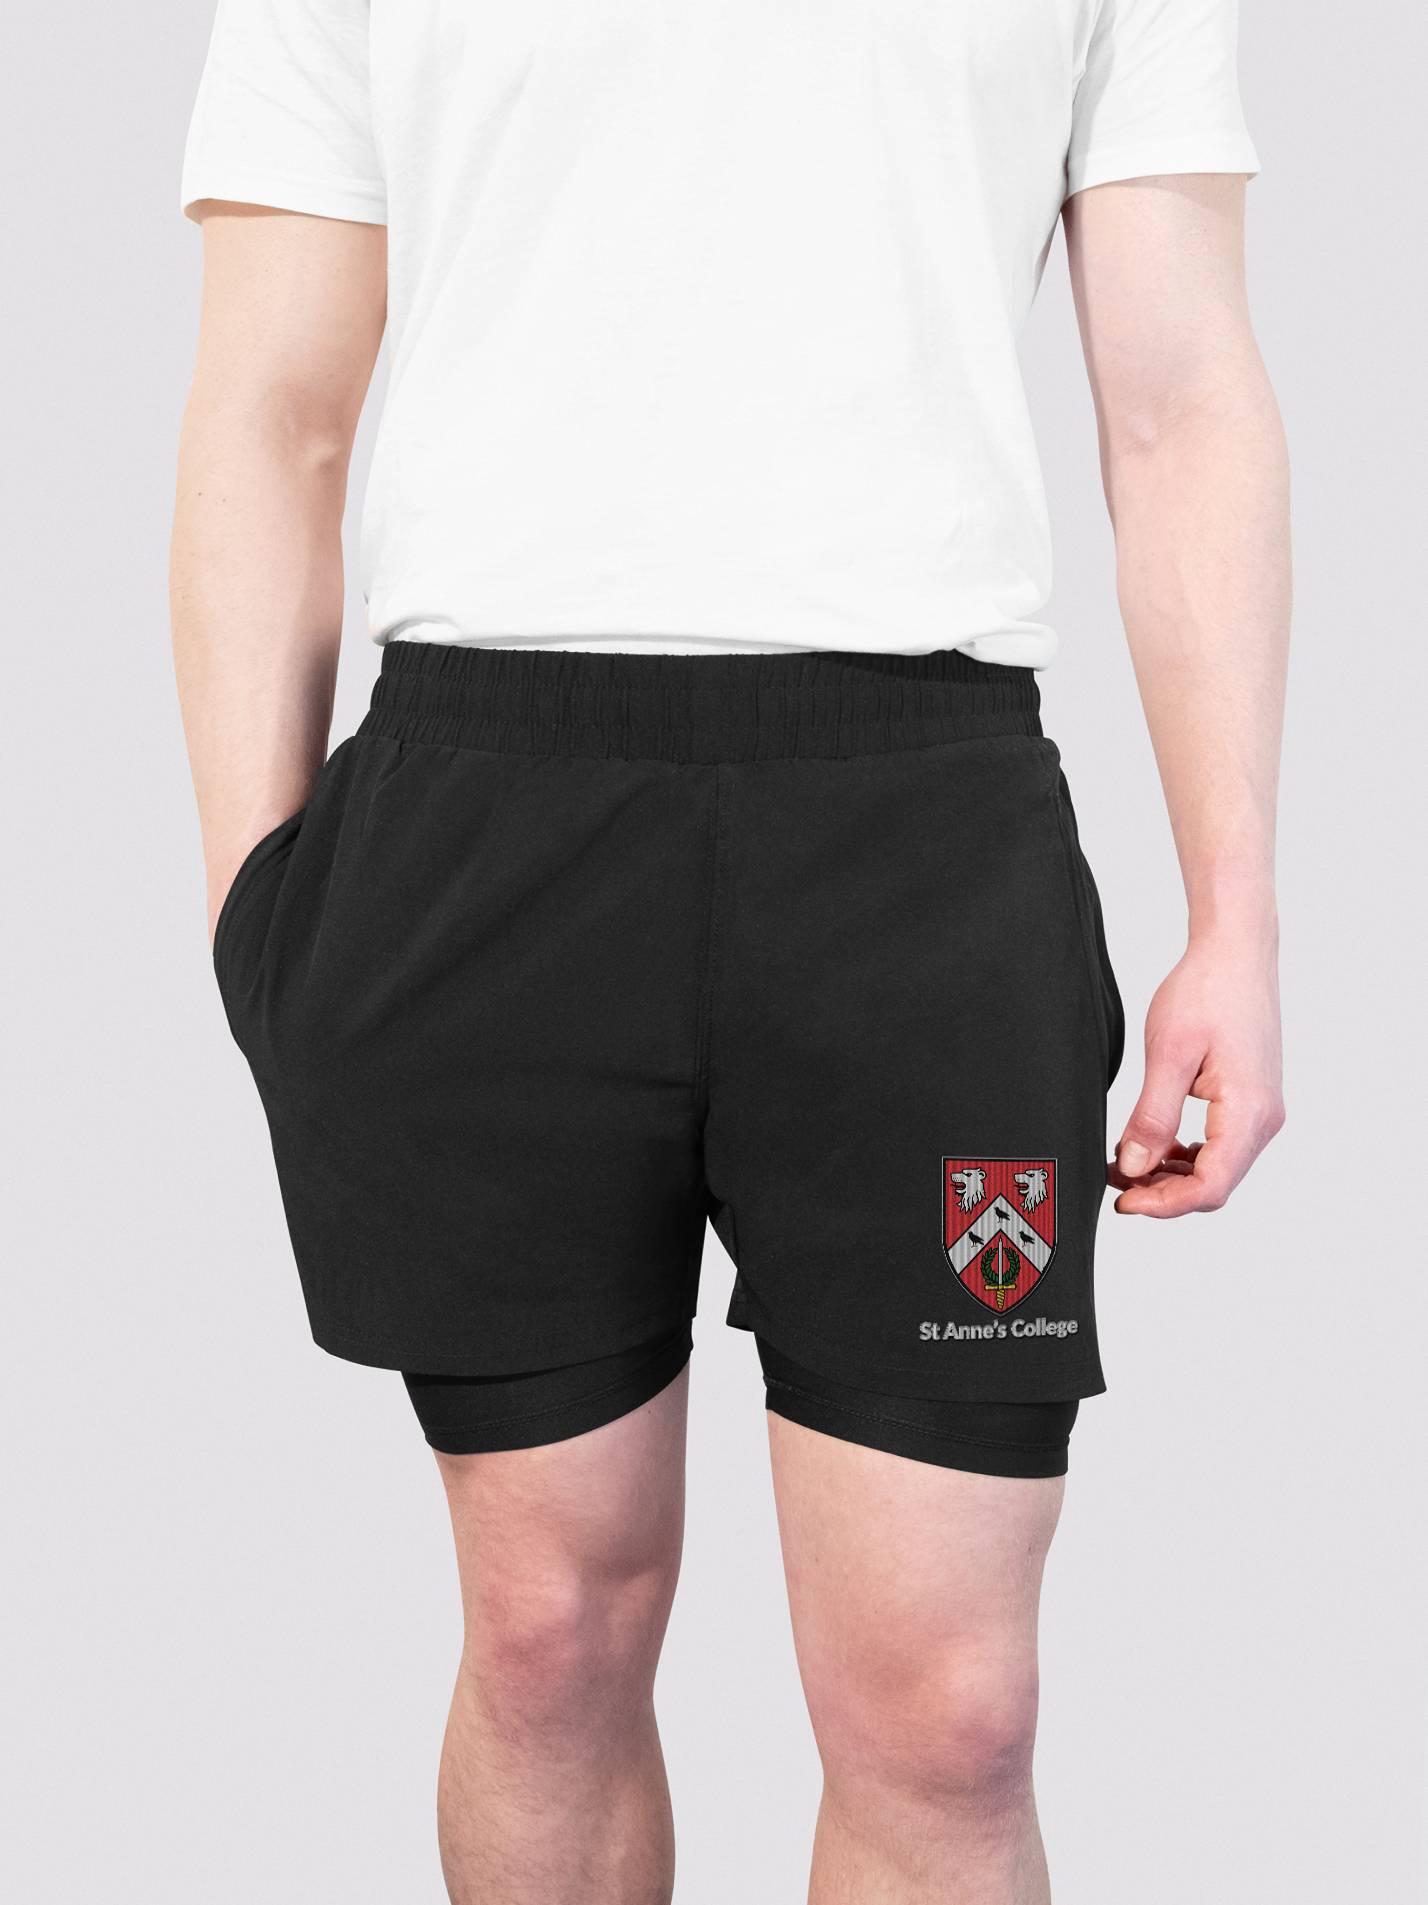 St Anne's College Oxford Dual Layer Sports Shorts